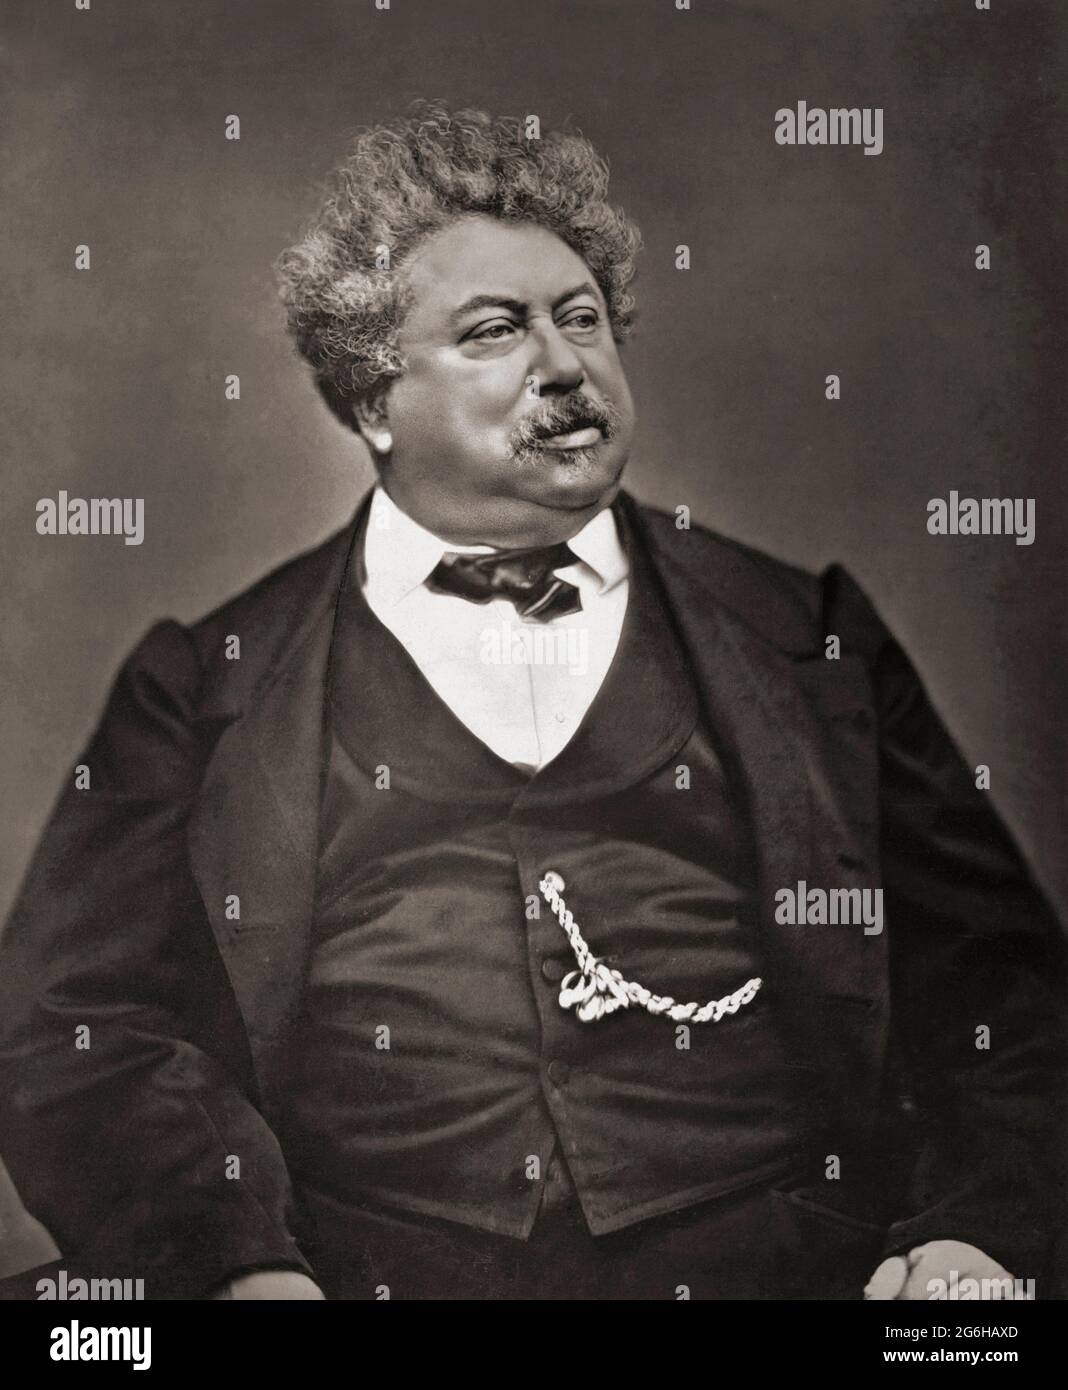 Alexandre Dumas Senior, aka Alexandre Dumas père, 1802 - 1870.  French author.  Amongst his many works are the still popular The Three Musketeers and The Count of Monte Cristo.  After a photograph by Etienne Carjat. Stock Photo